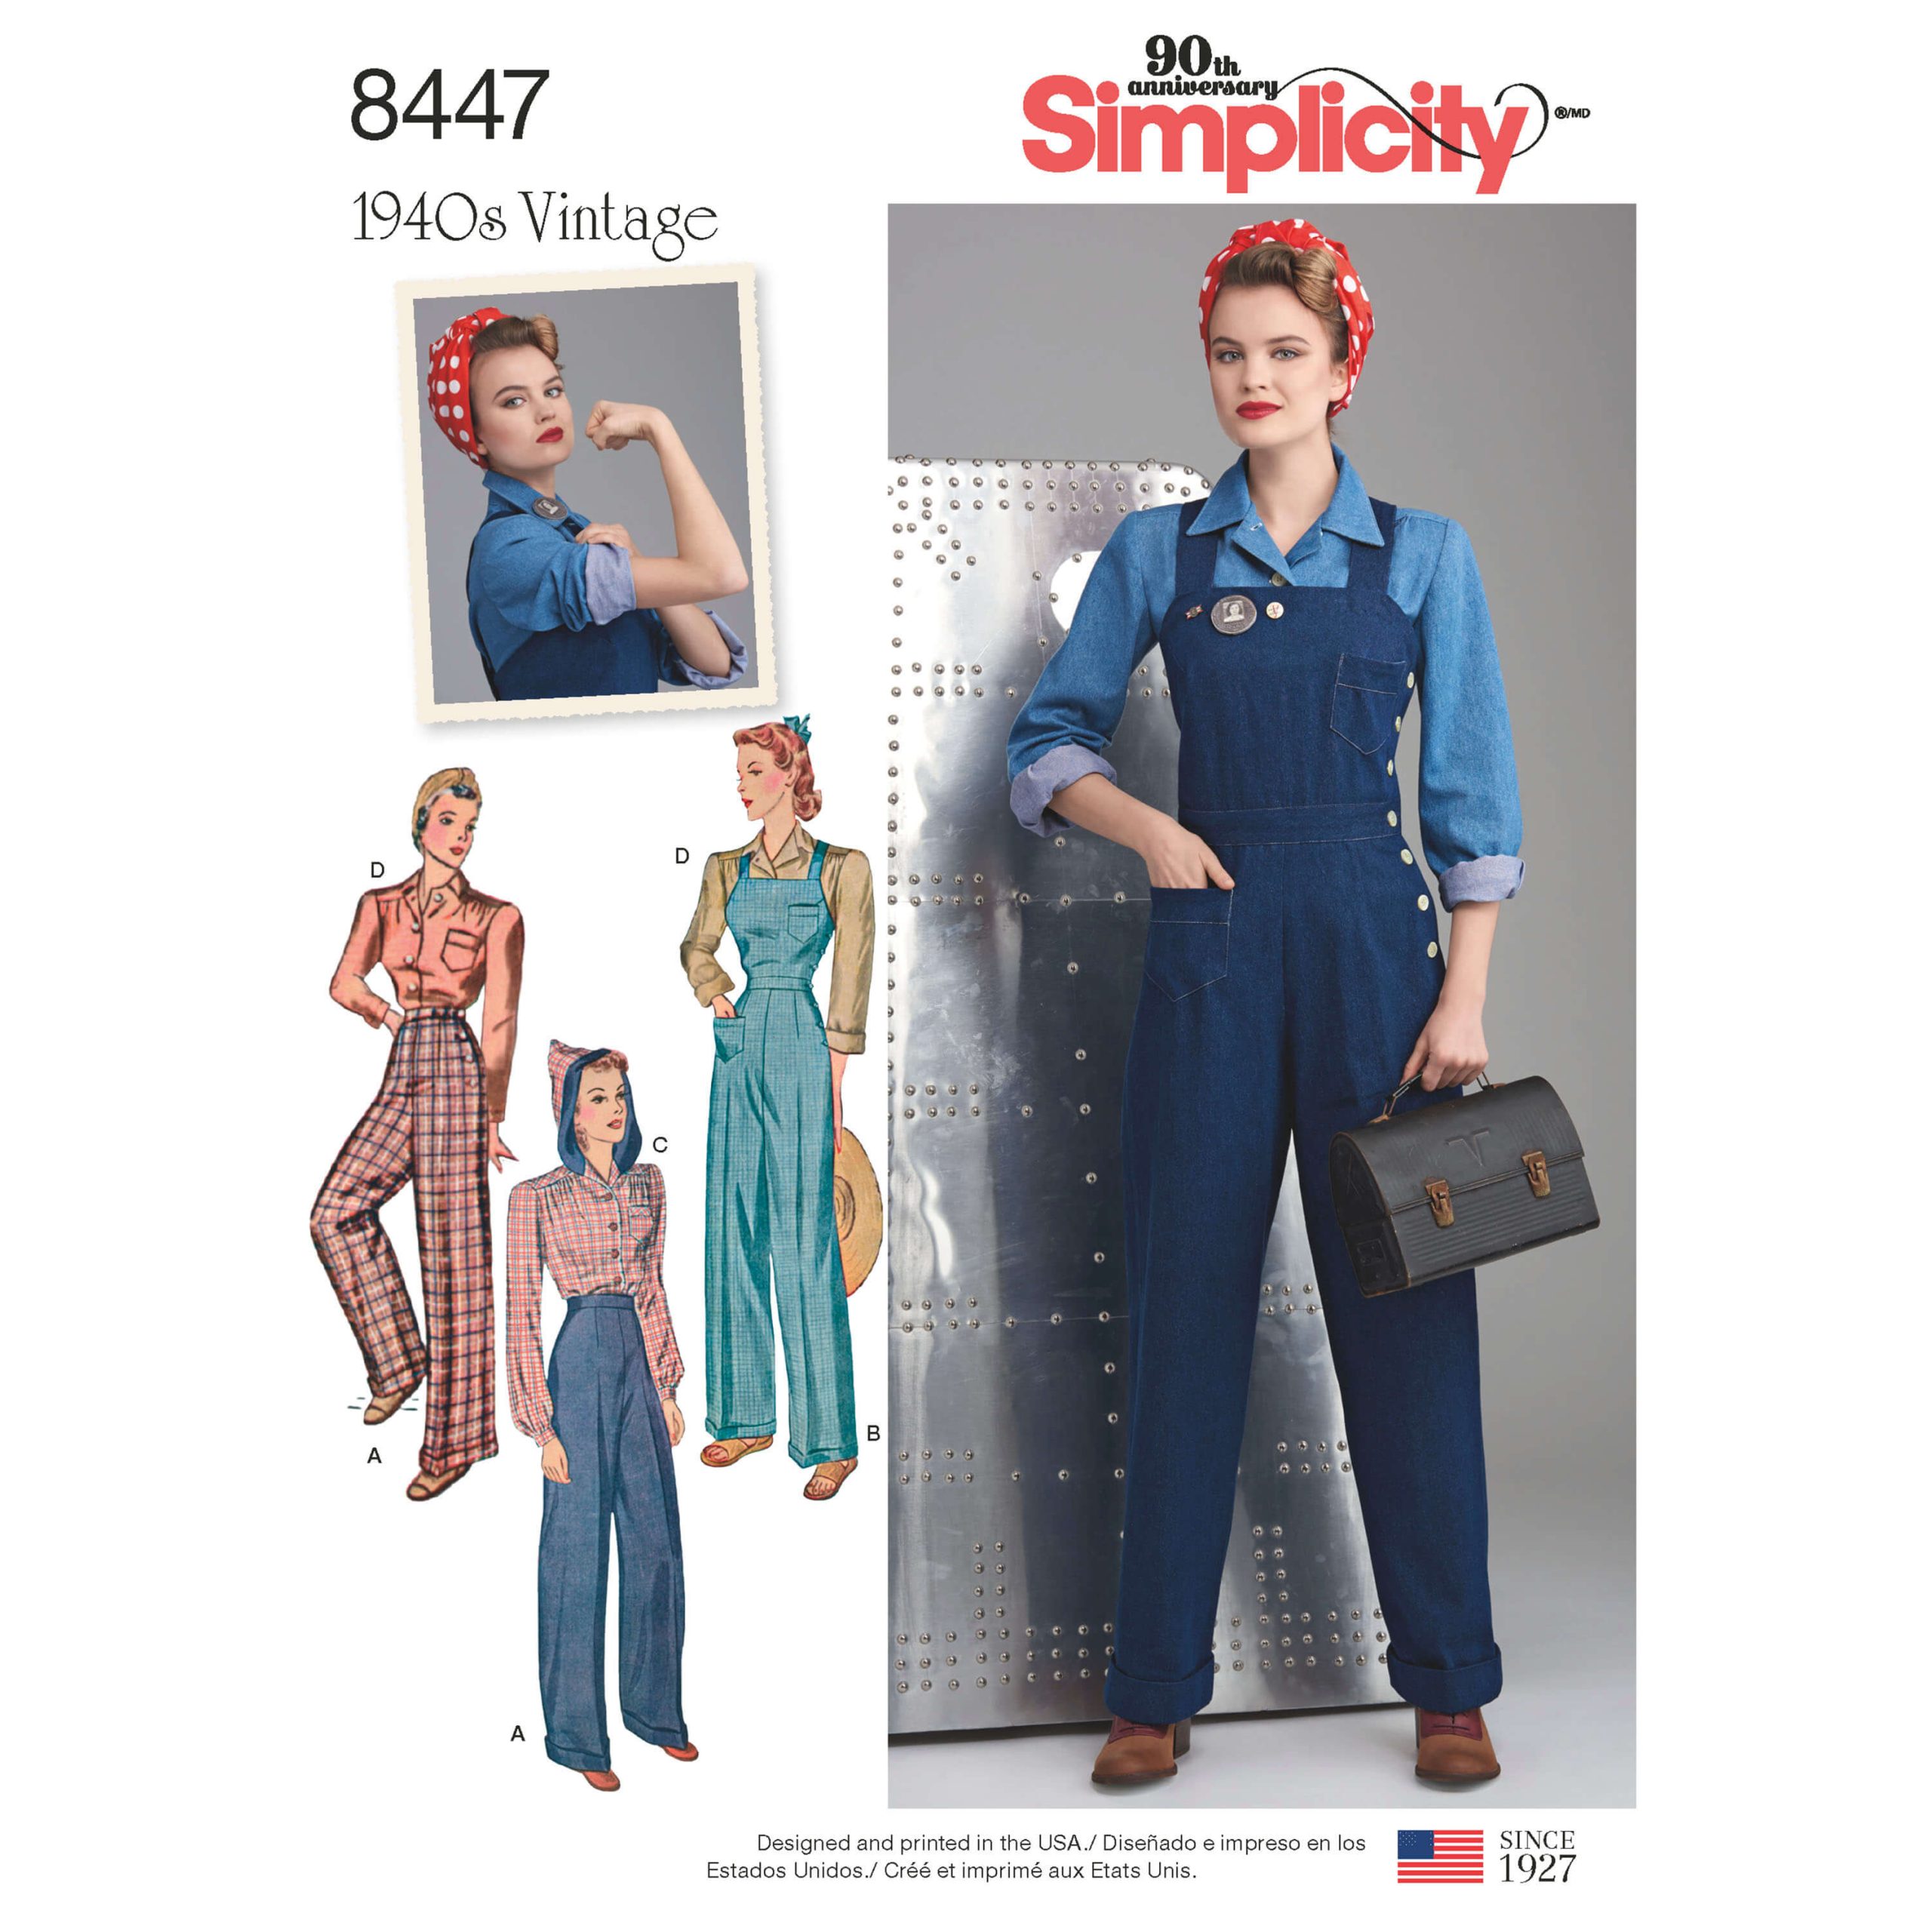 Simplicity Sewing Pattern S8447 Women's Vintage Trousers, Overalls and Blouses